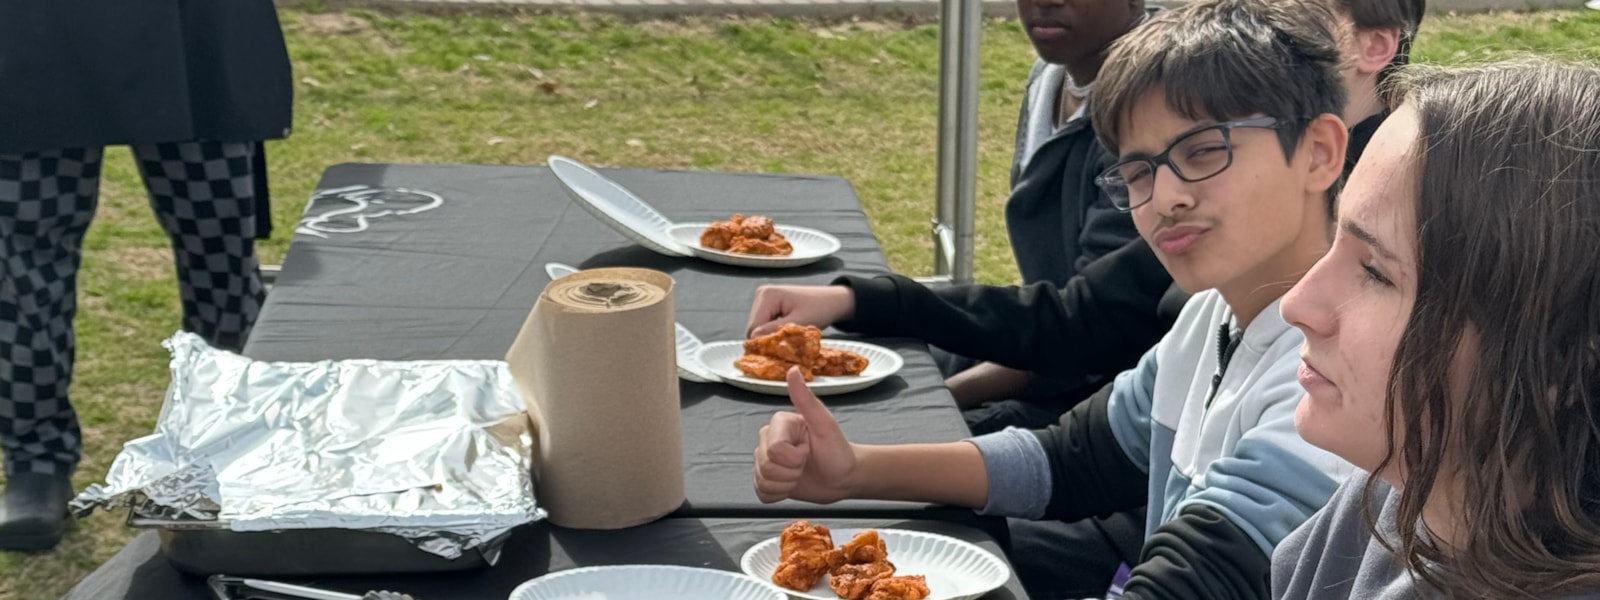 Students Eating Wings